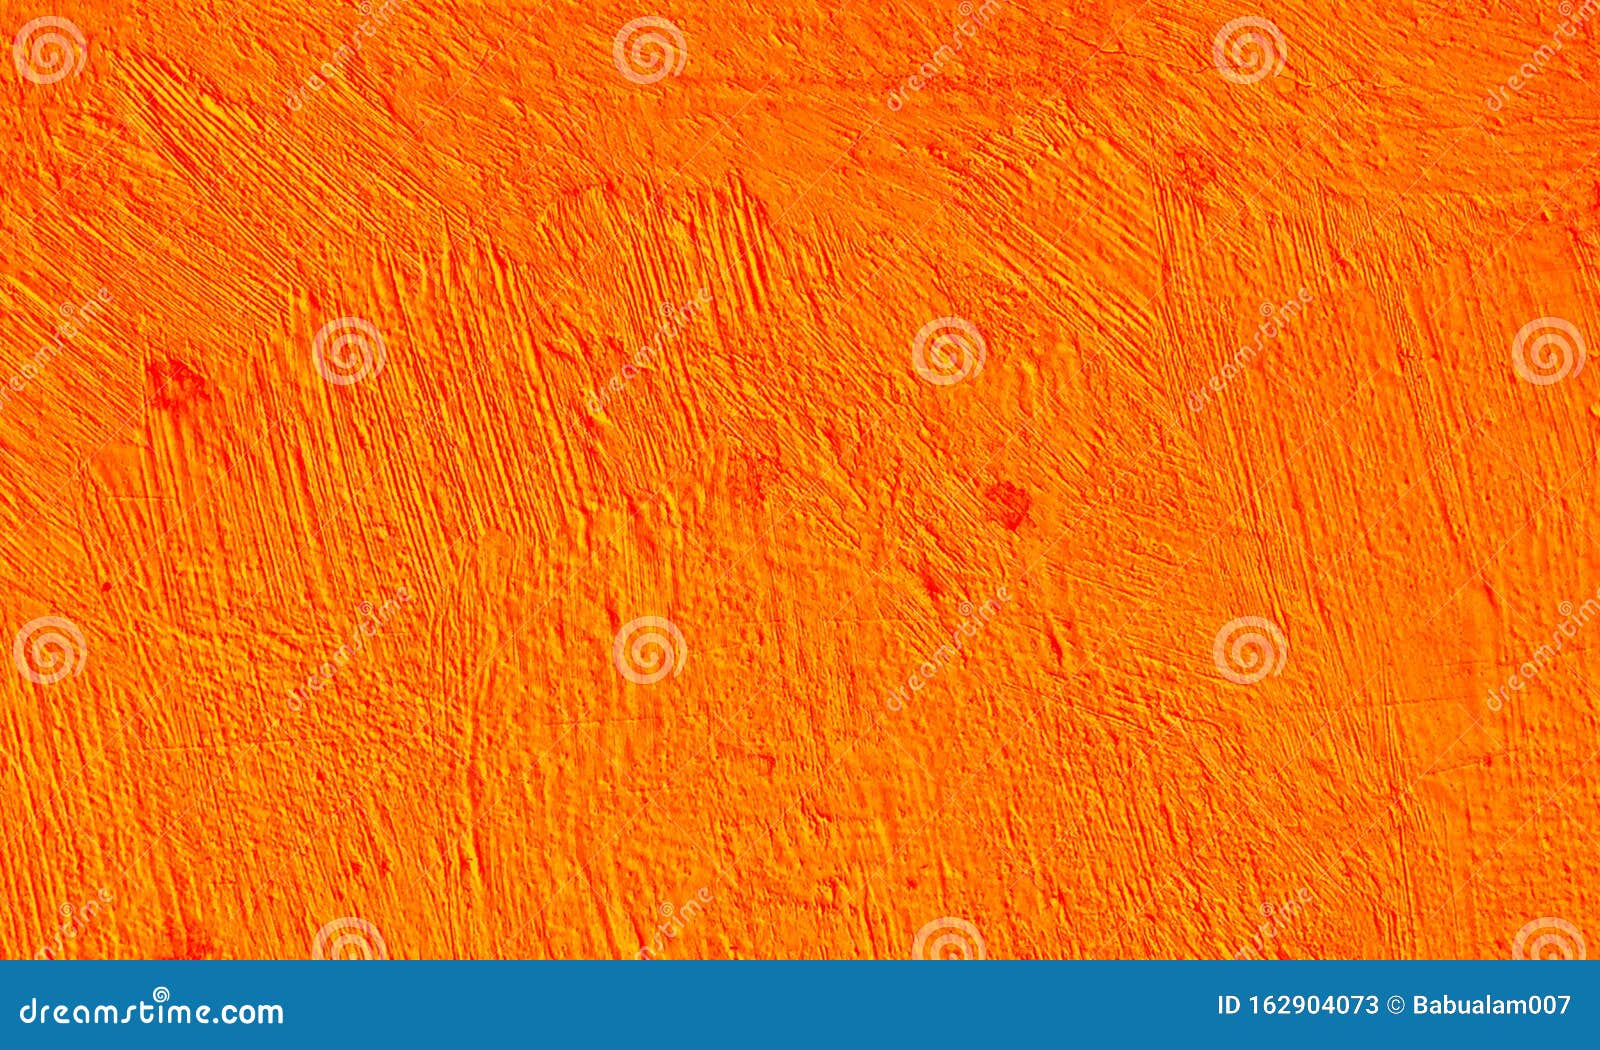 Texture  and Mix Abstract Grunge Rusty Distorted Decay Old  Texture Background Wallpaper. Memory, Colourful. Stock Illustration -  Illustration of memento, pattern: 162904073